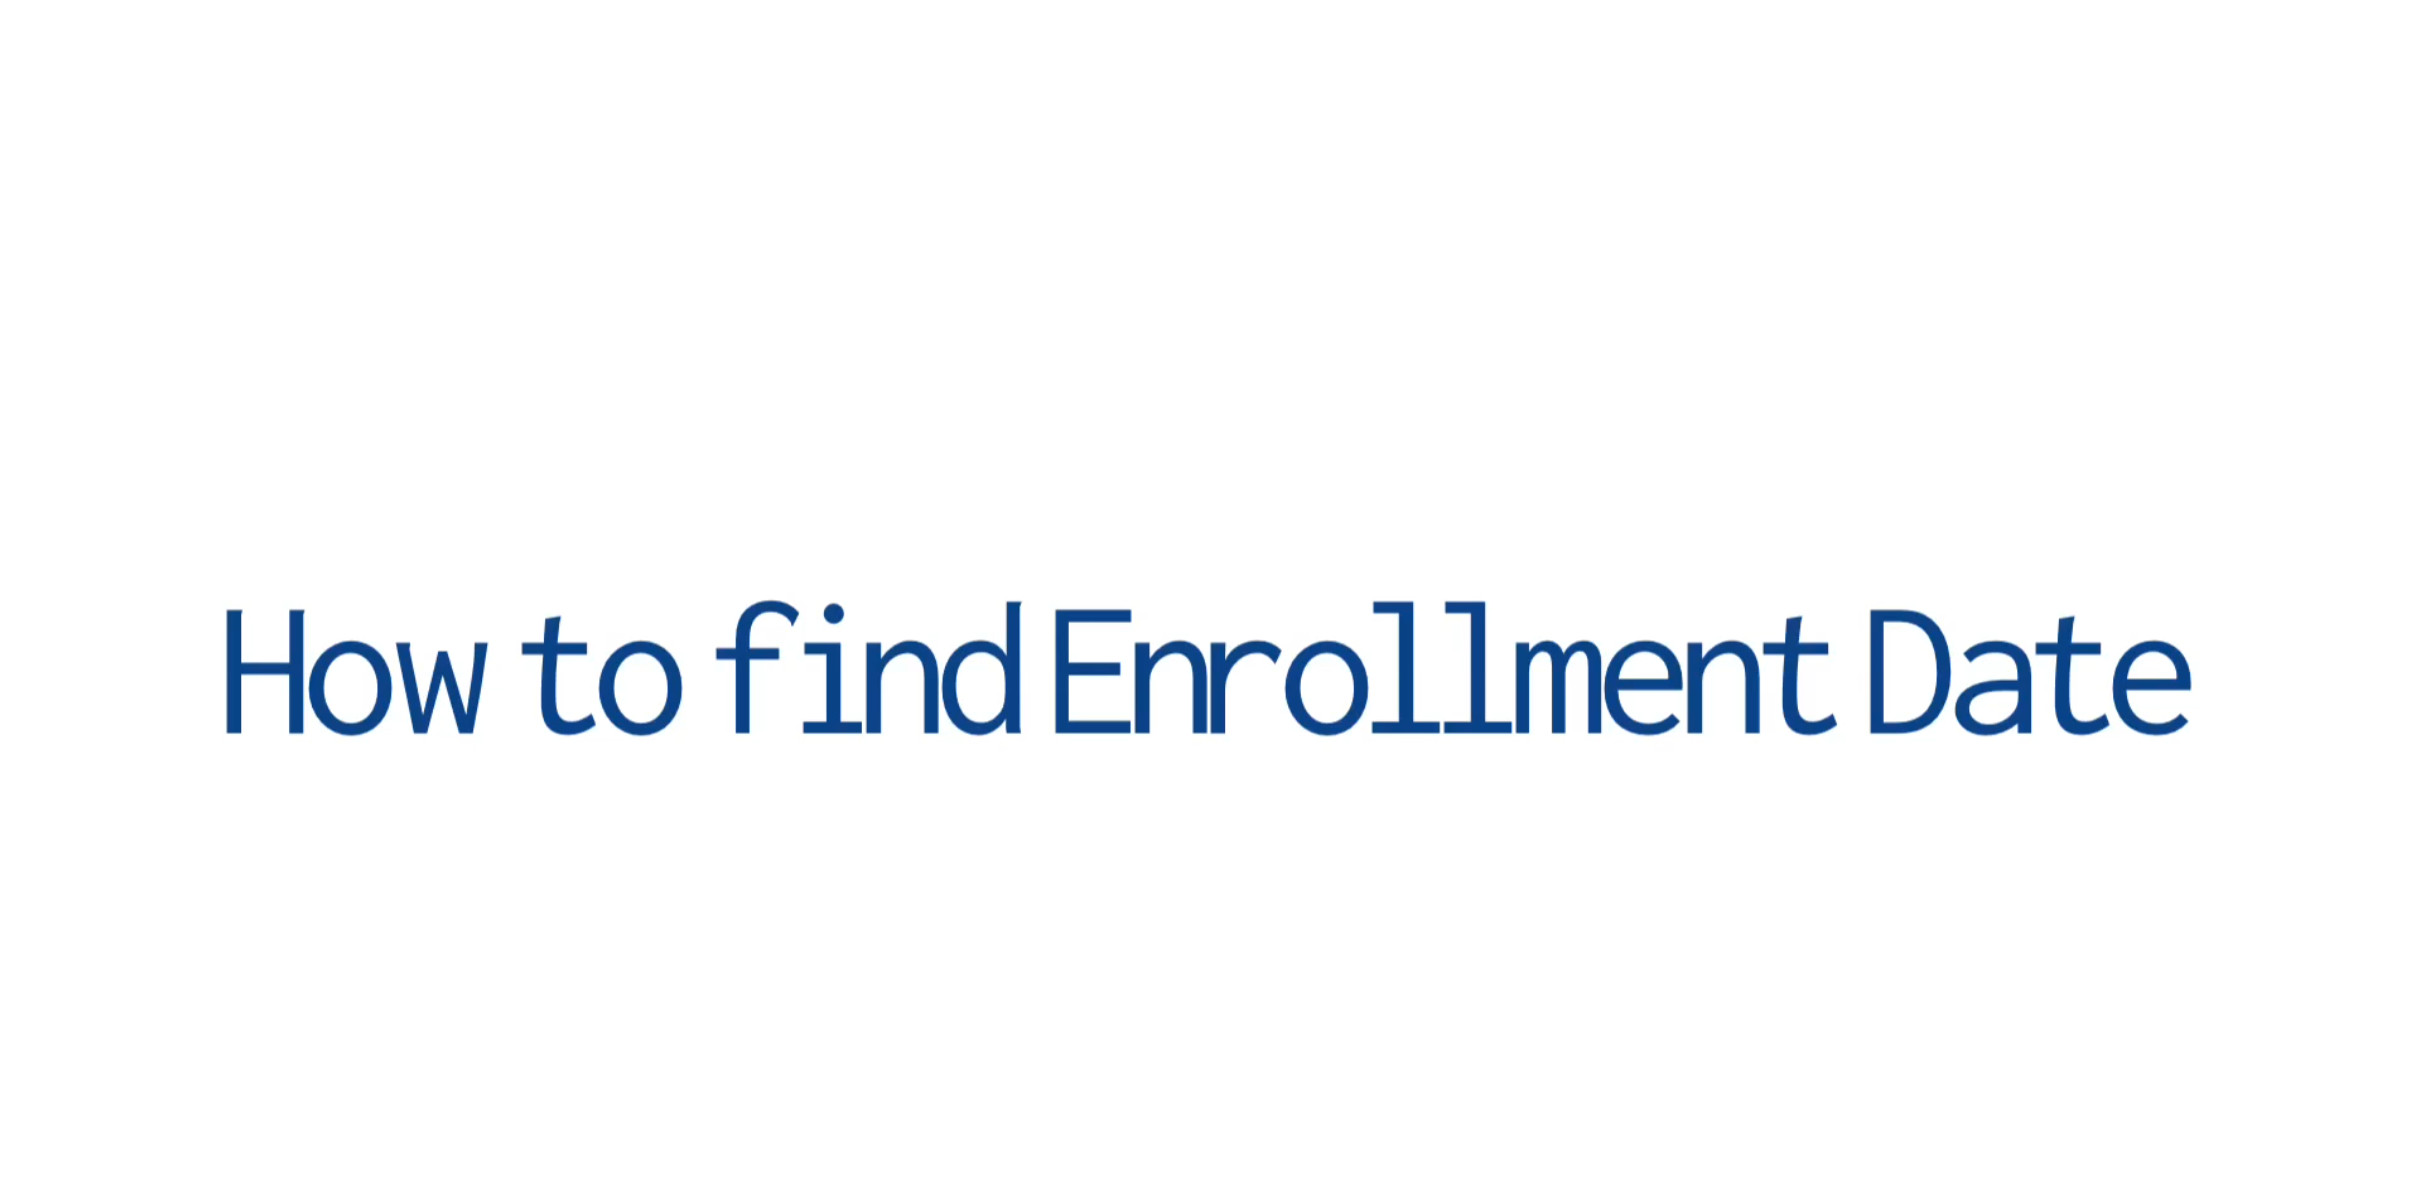 How to Find an Enrollment Date